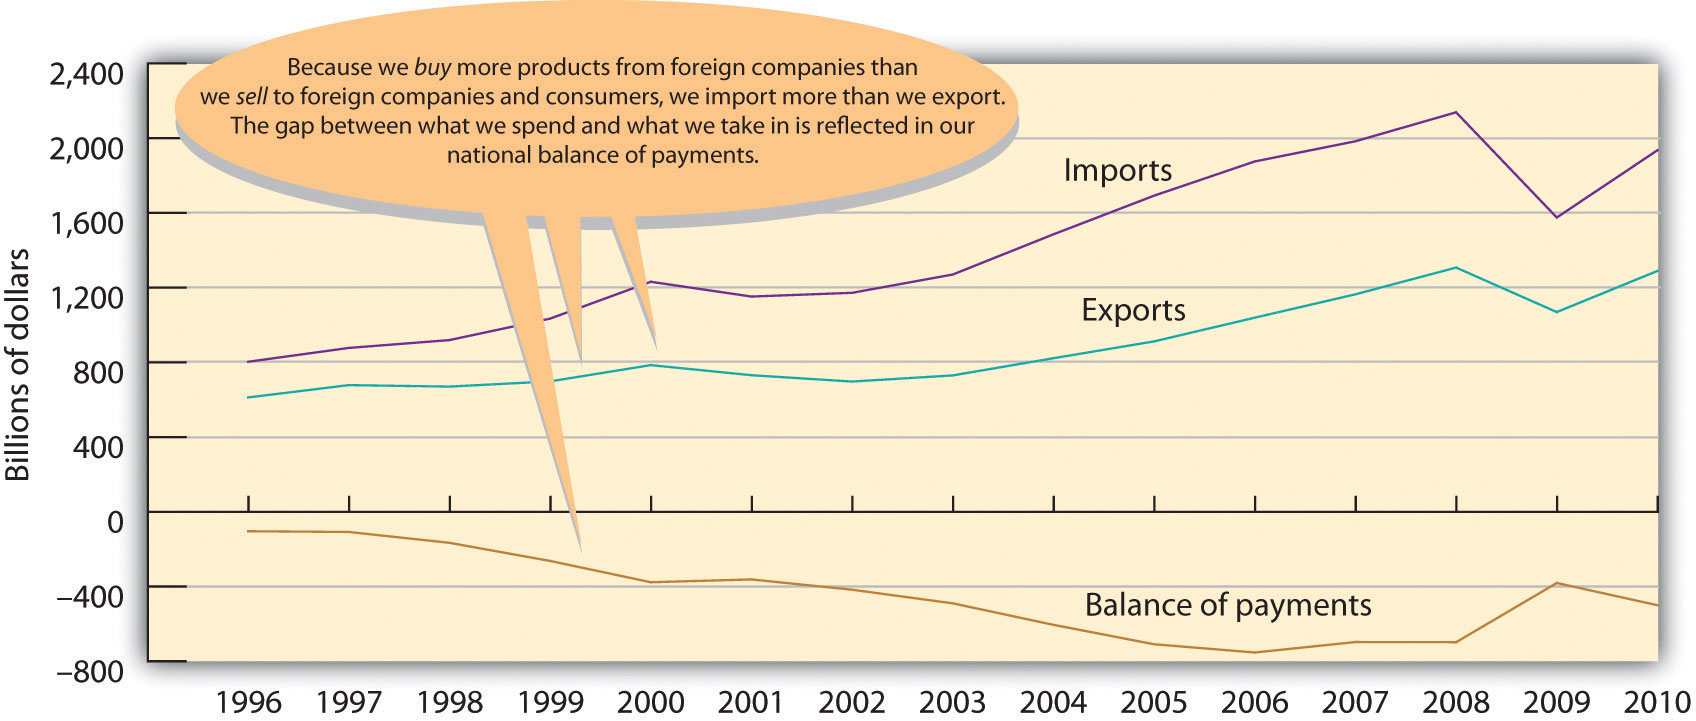 U.S. Imports, Exports, and Balance of Payments, 1994-2010